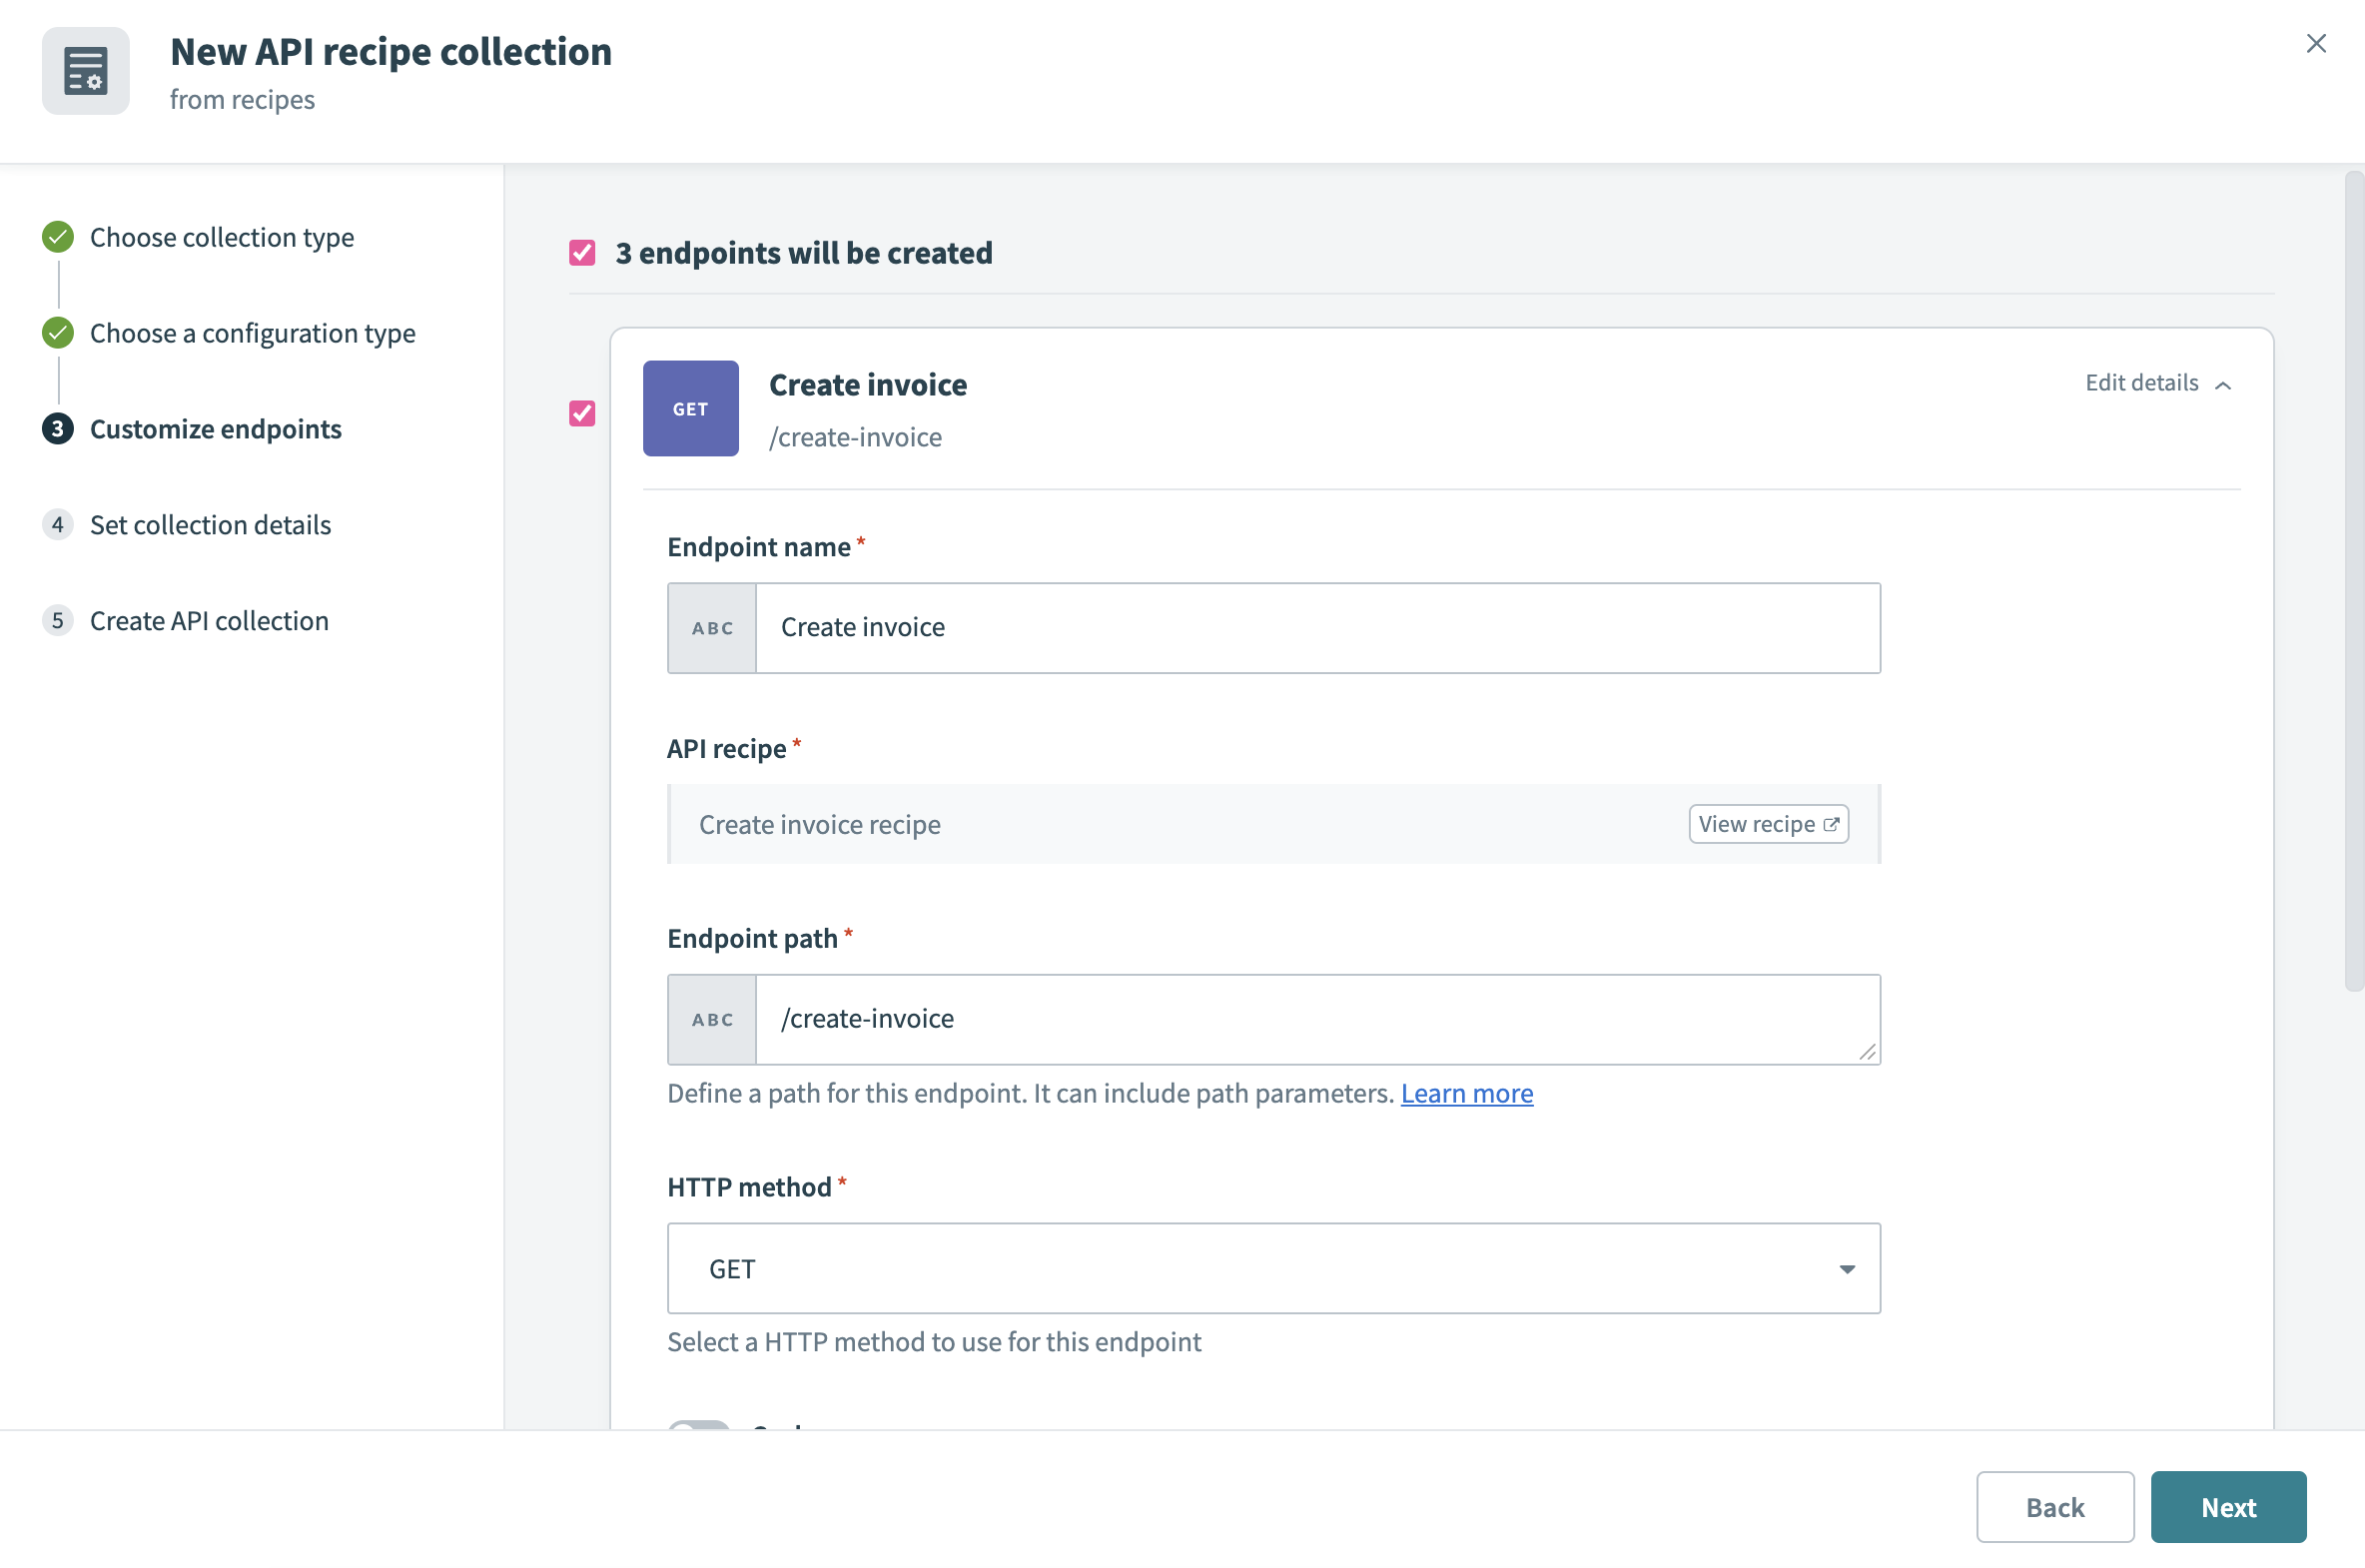 Customize API recipe collection endpoints